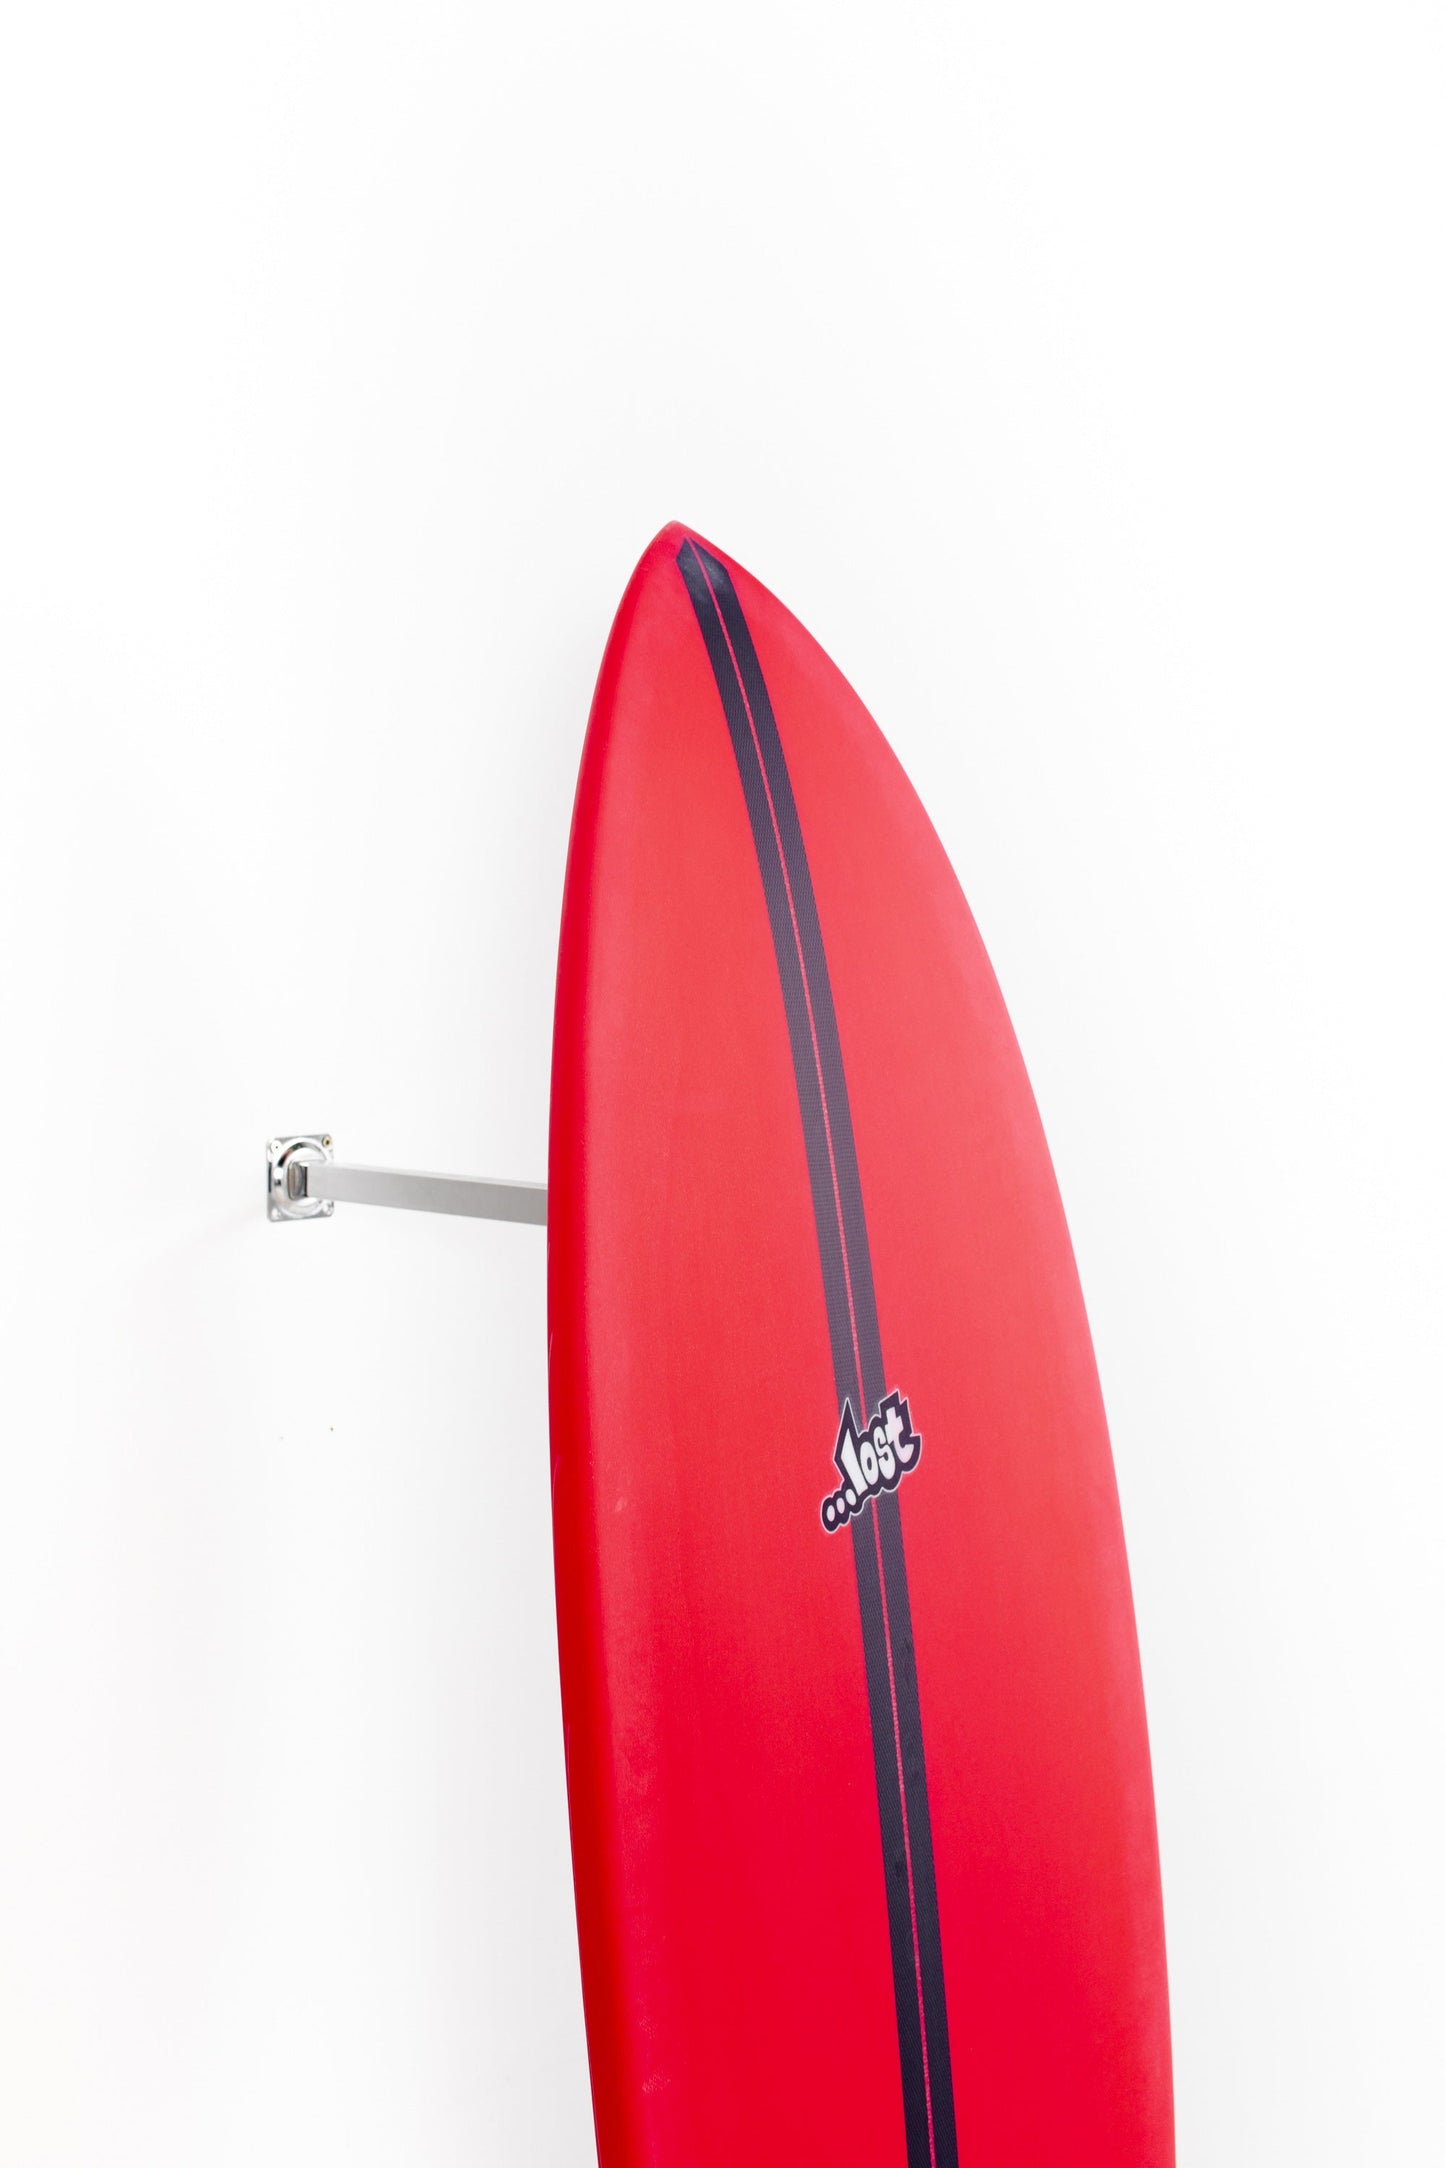 Lost SurfboardS RNF96 5'7